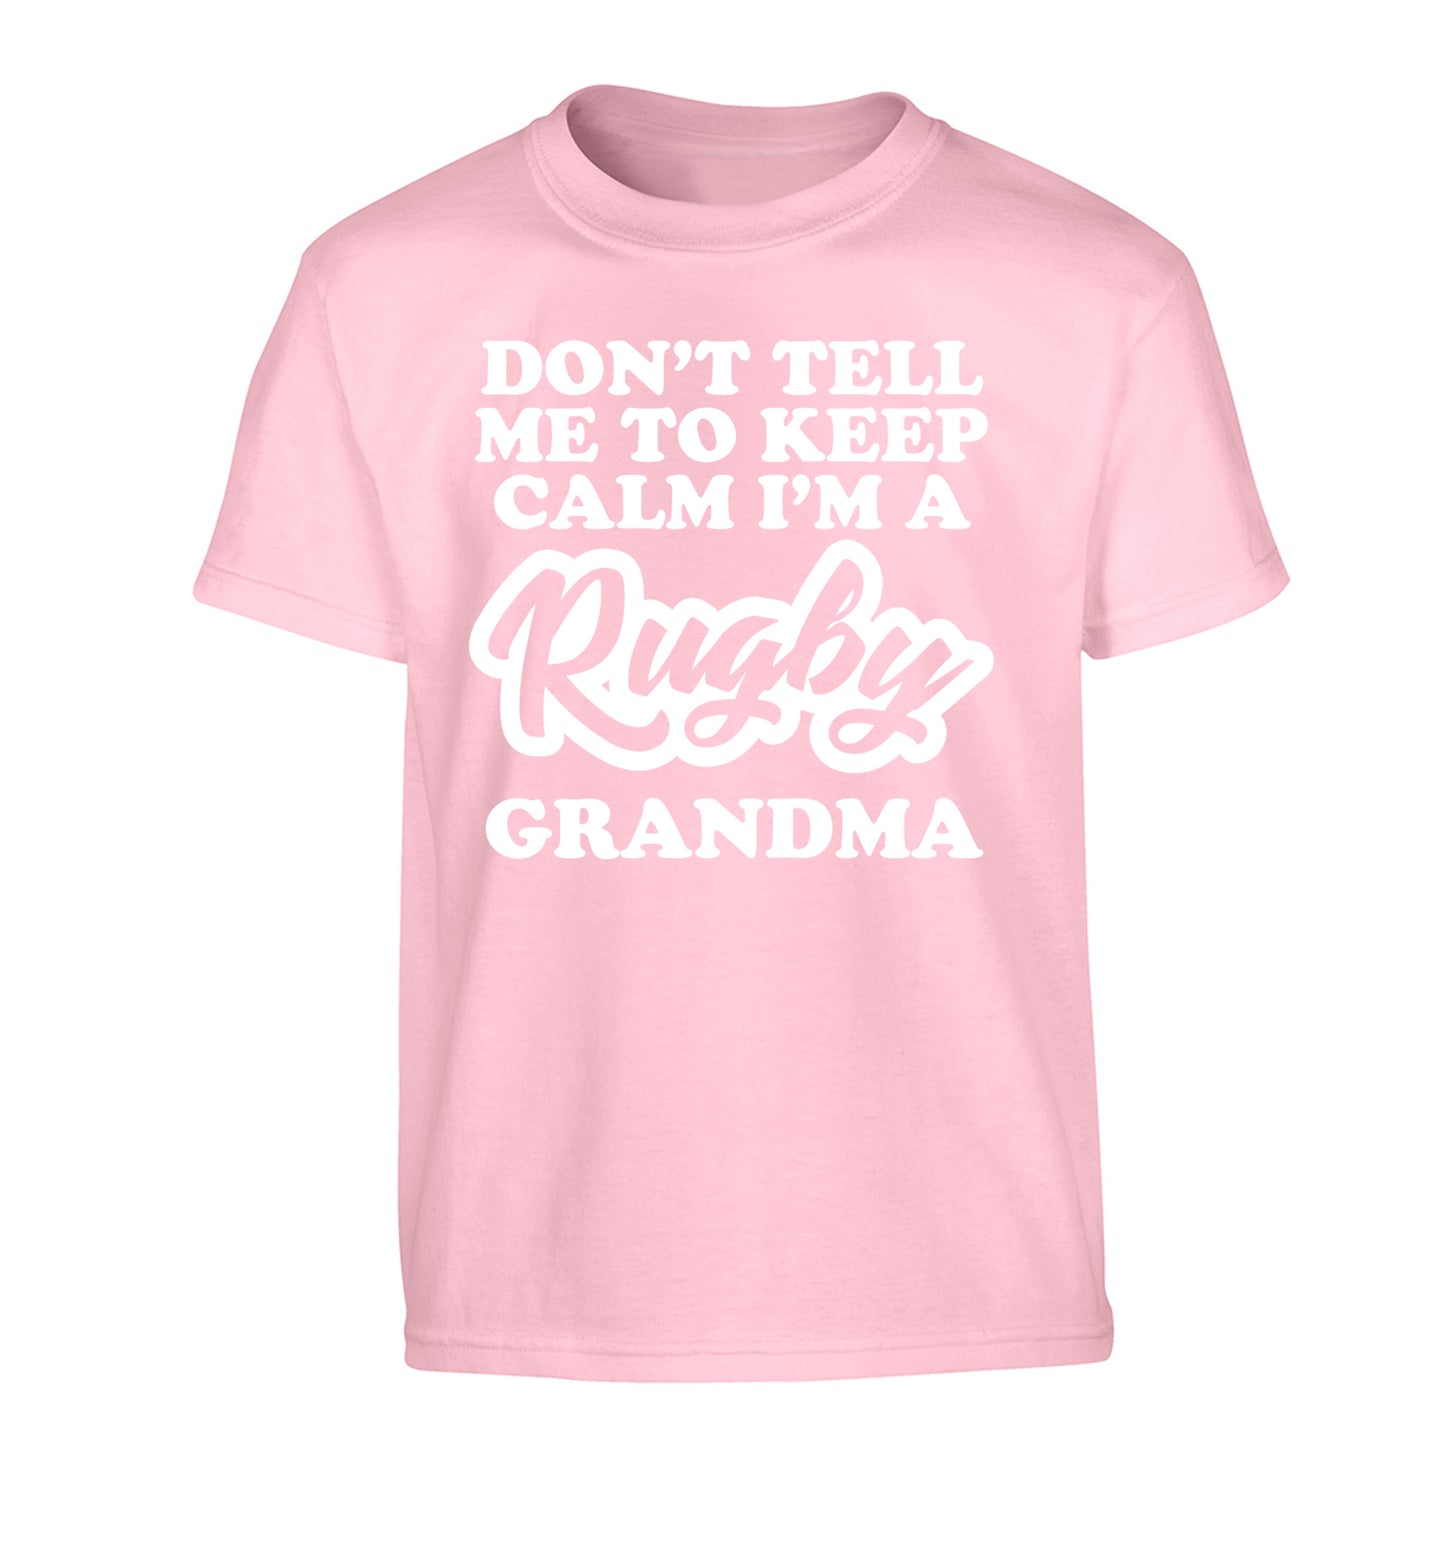 Don't tell me to keep calm I'm a rugby grandma Children's light pink Tshirt 12-13 Years